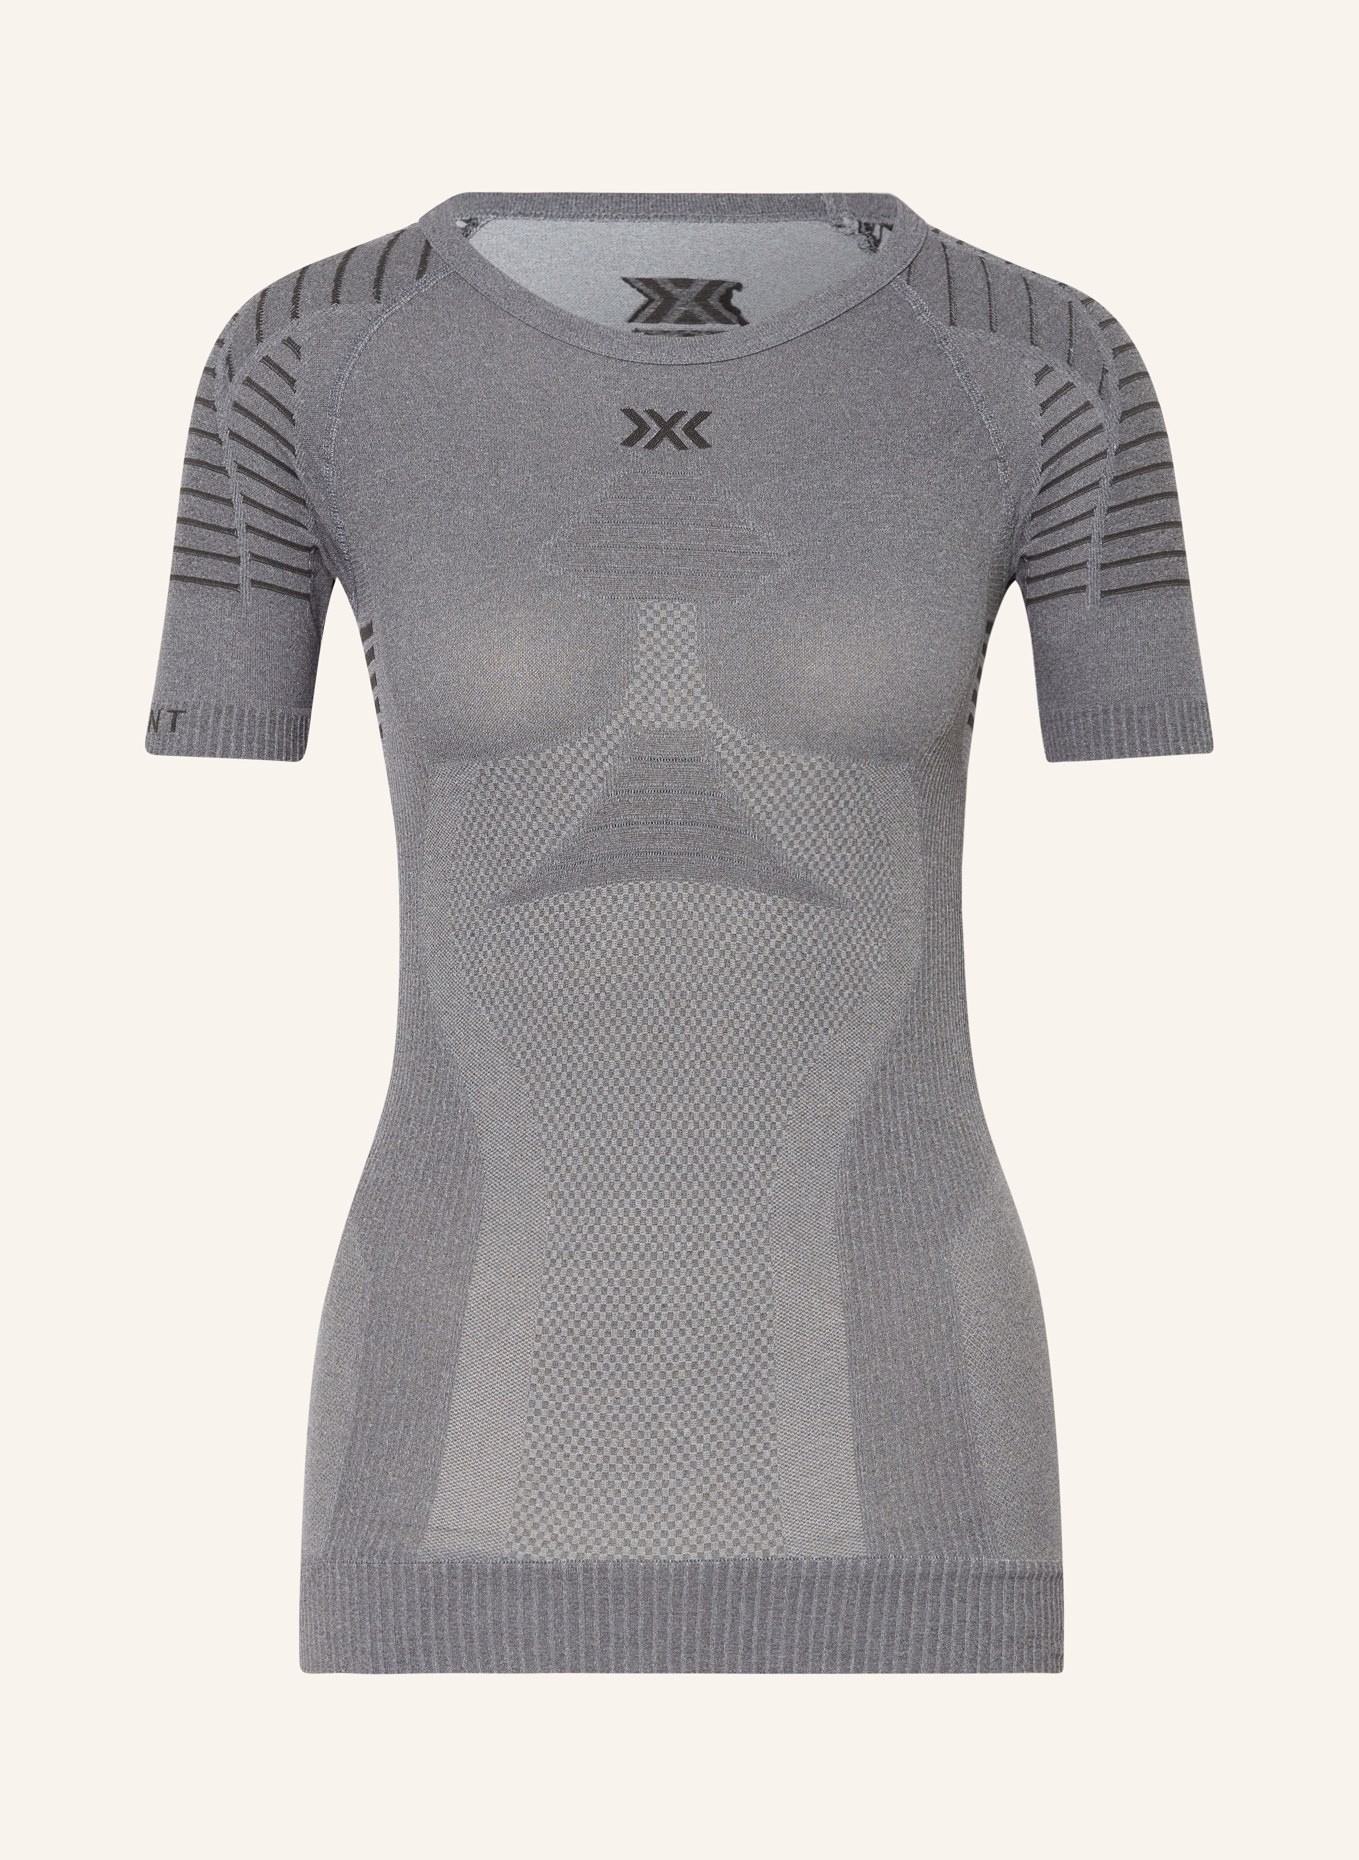 X-BIONIC Functional underwear shirt X-BIONIC® INVENT 4.0, Color: GRAY (Image 1)